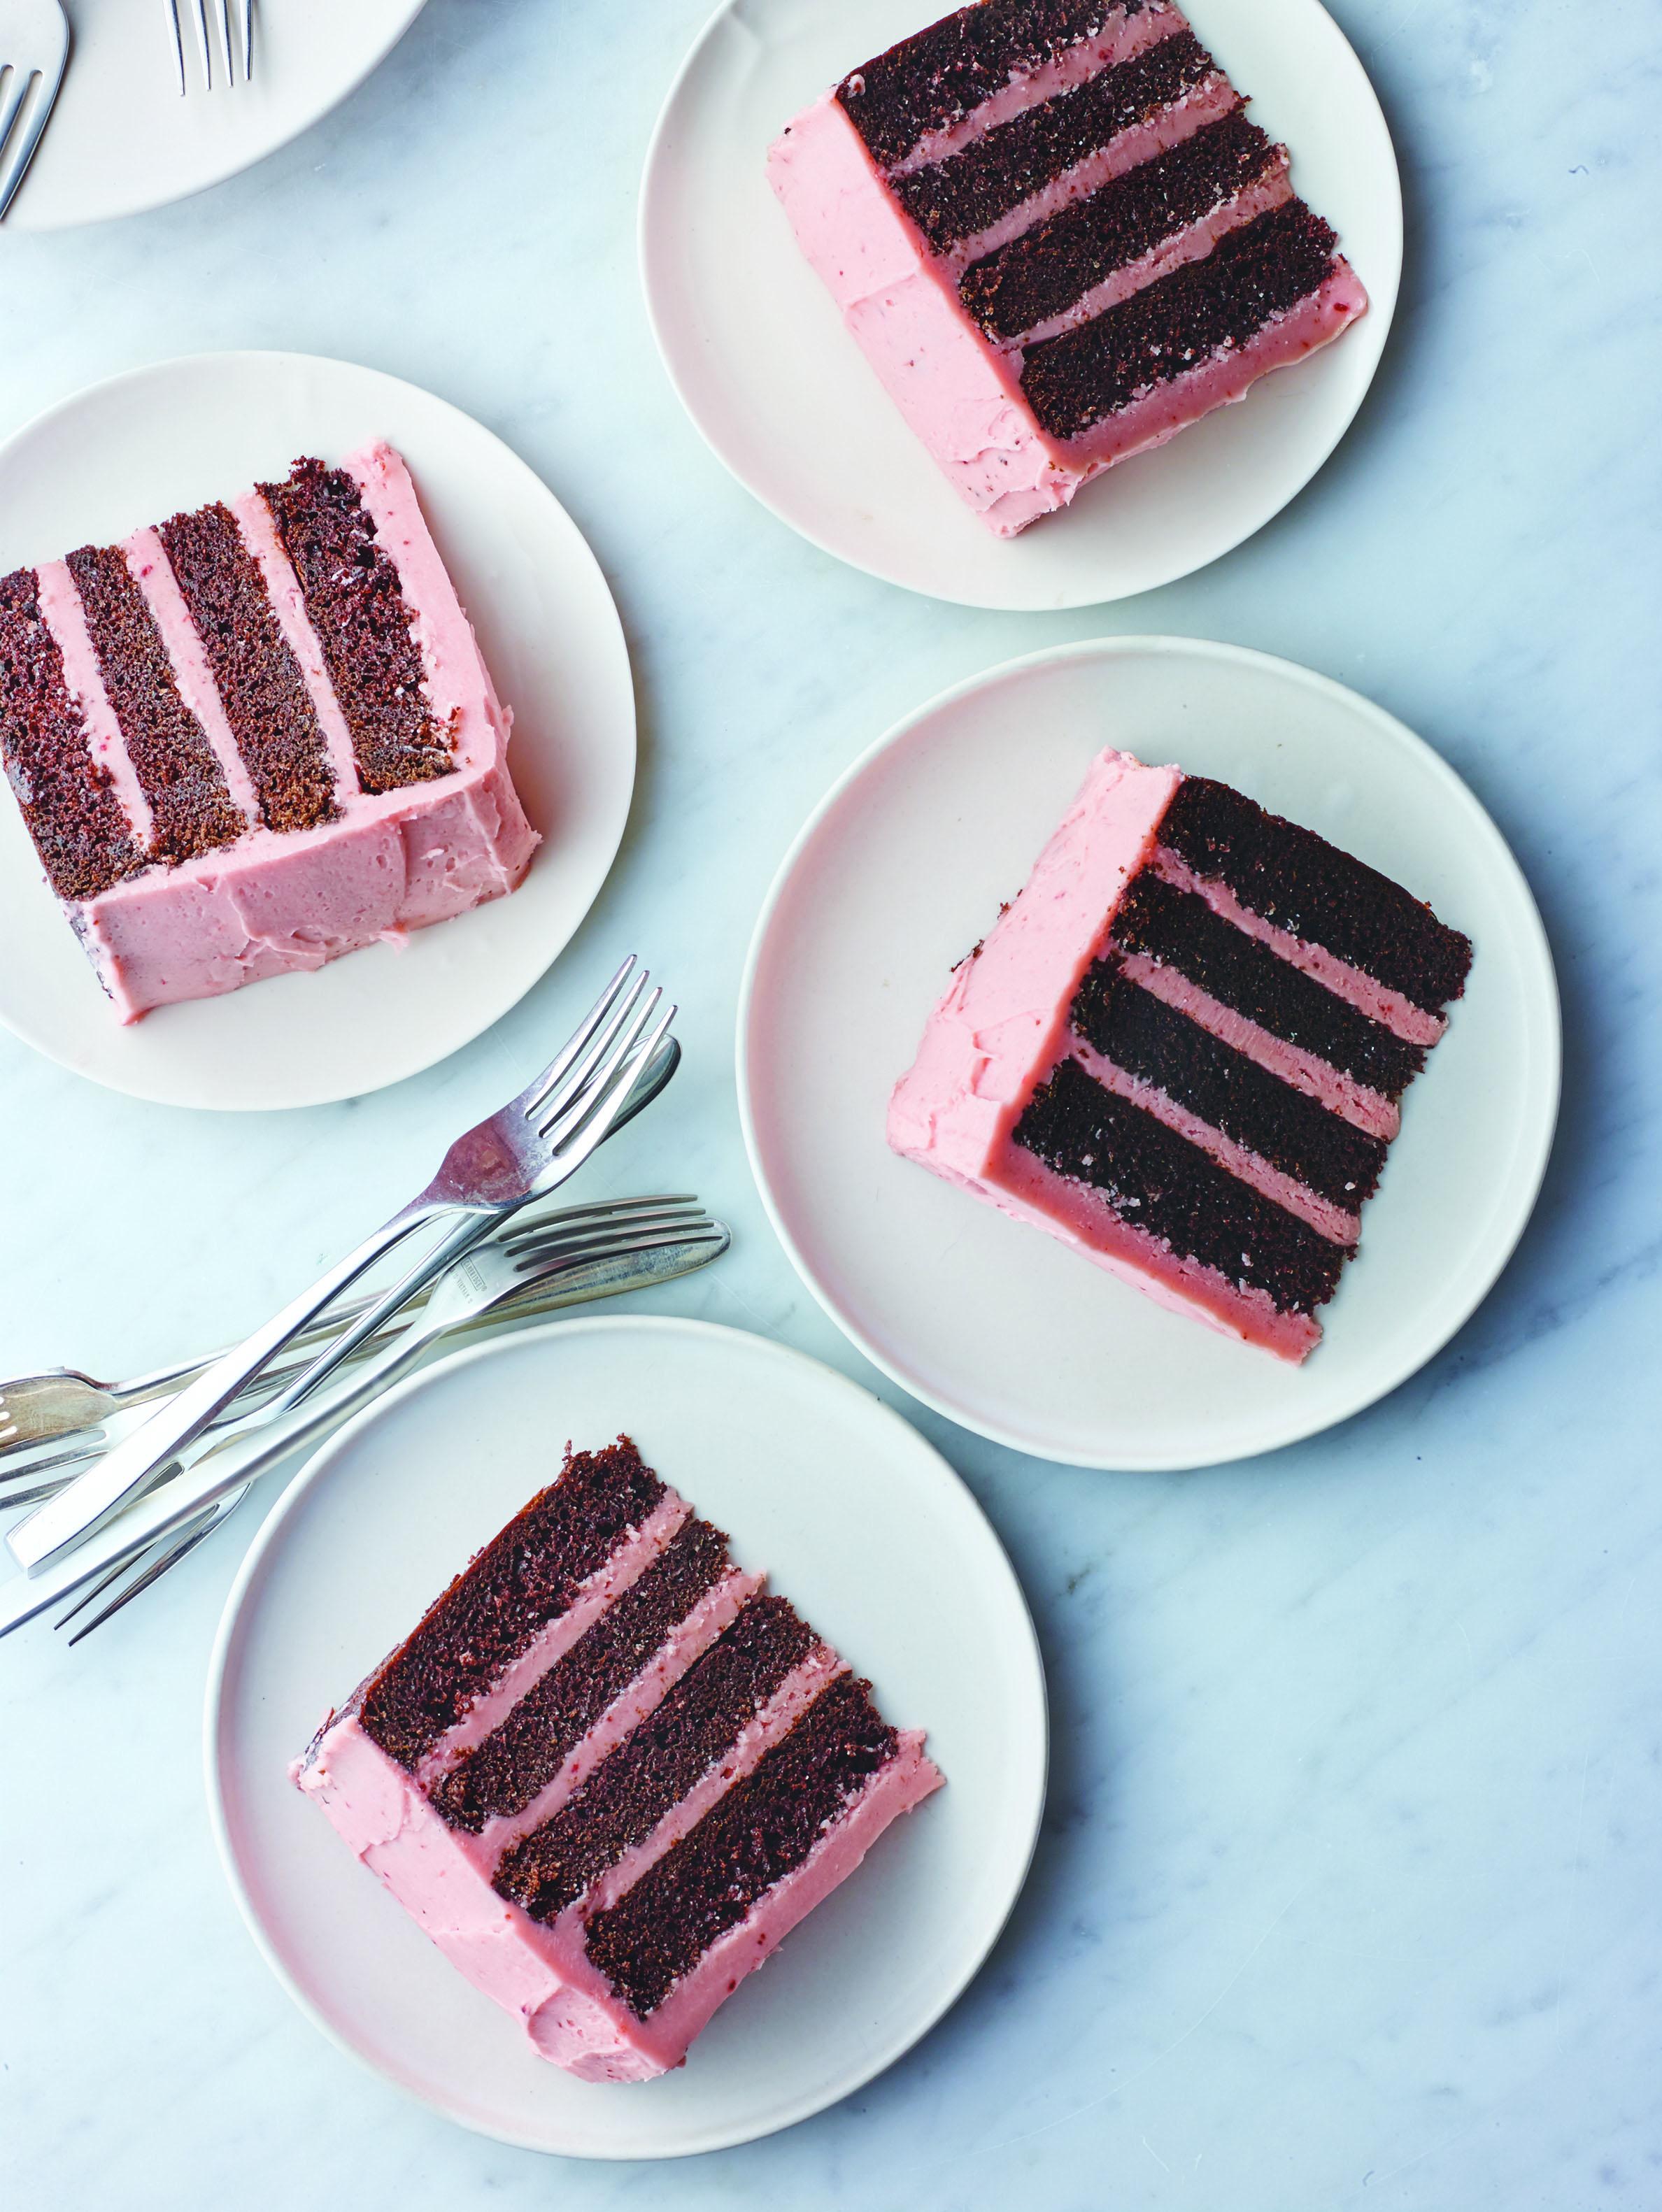 Chocolate Layer Cake with Strawberry Vanilla Frosting Beauty + Justin Chapple + A160328 Food &amp; Wine + Mad Genius Tips Book 2016